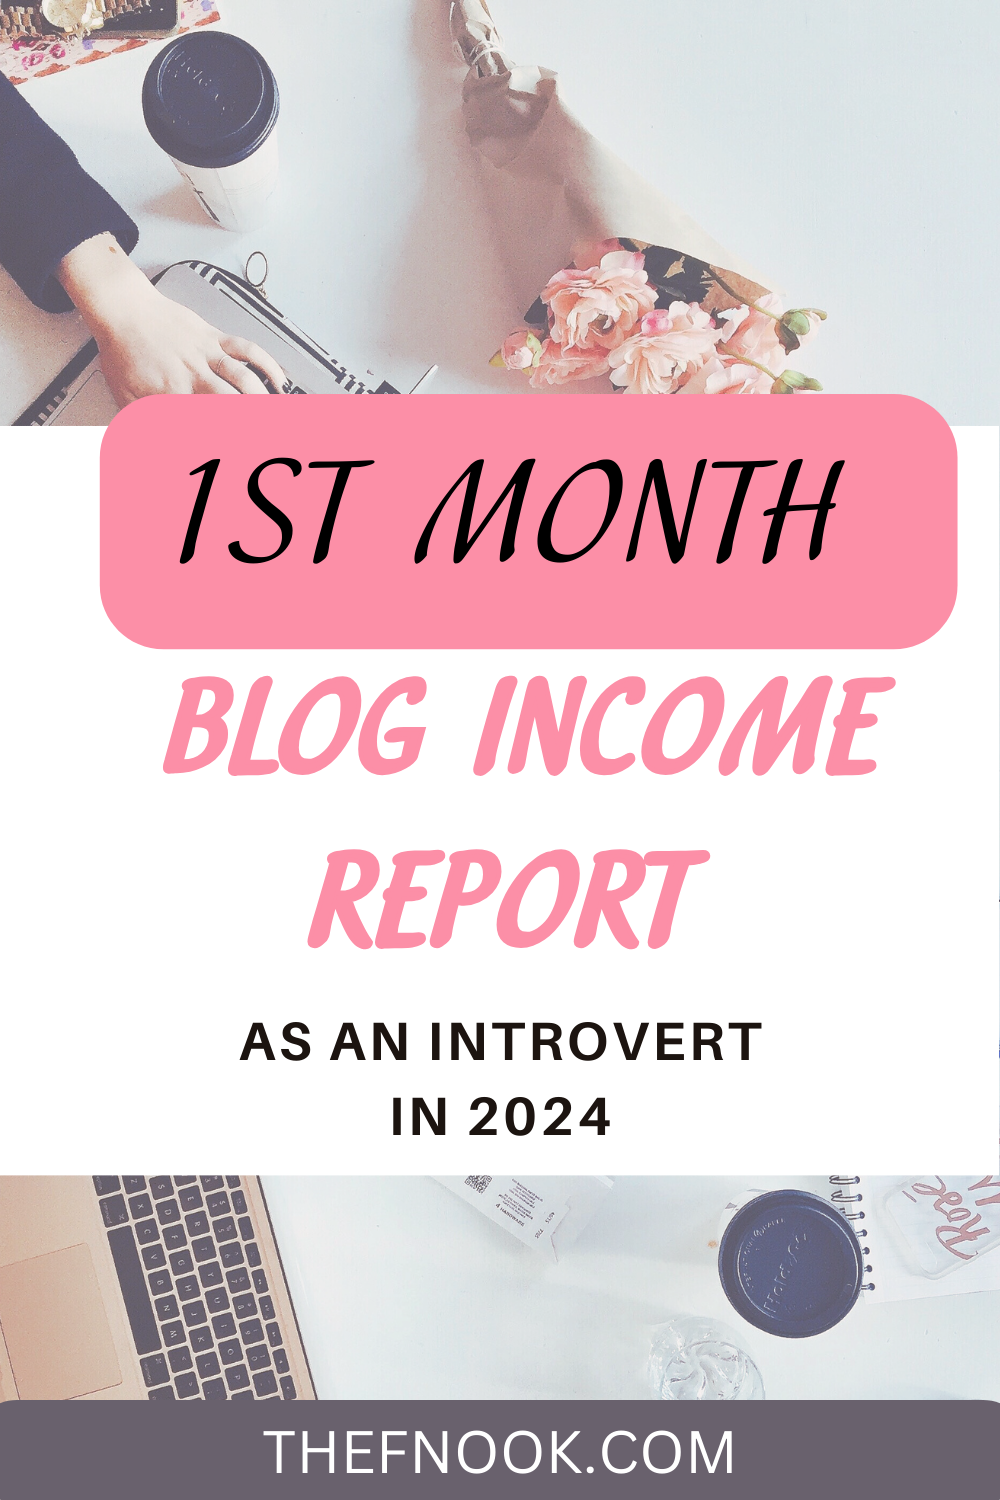 First month Blog Income Report as an introvert in 2024